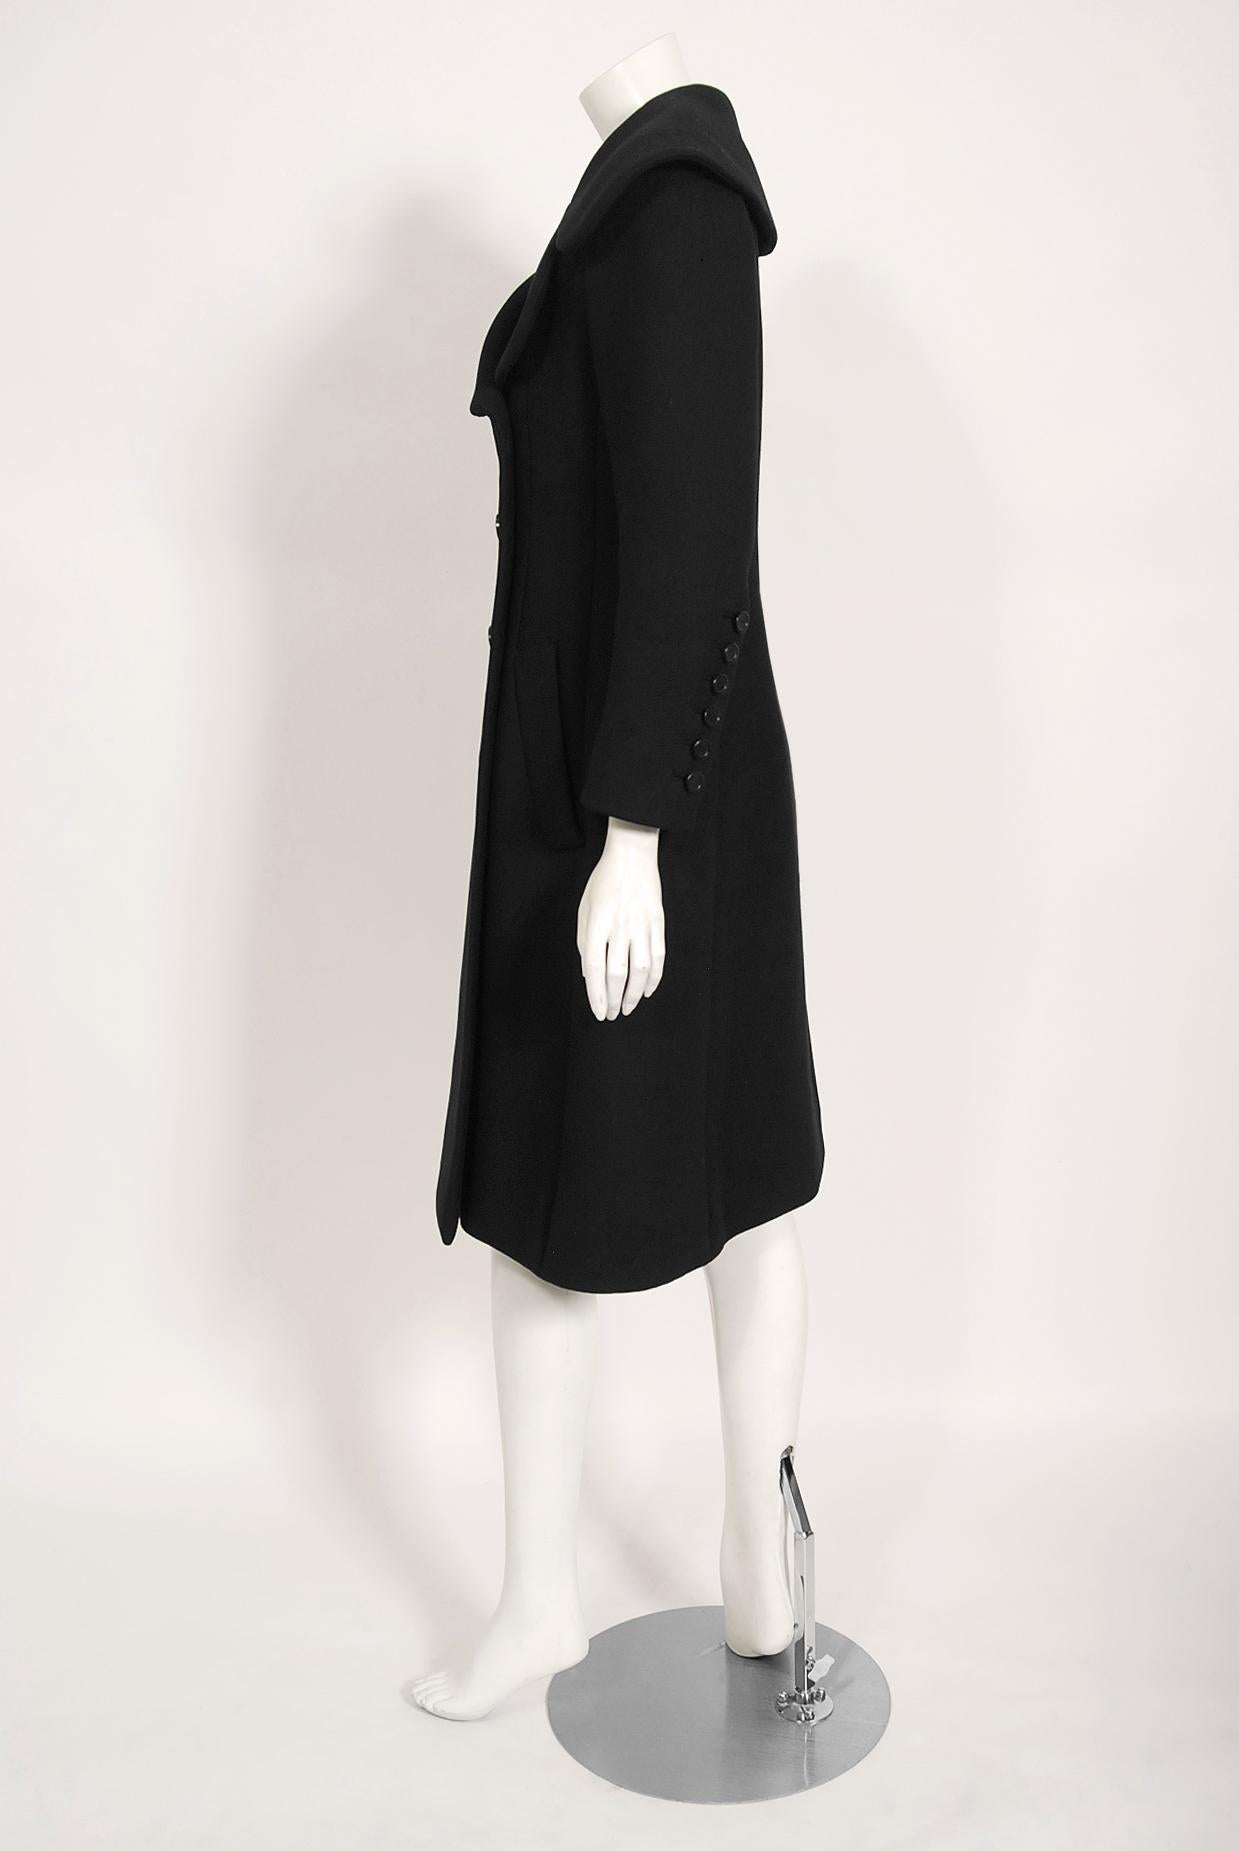 Vintage 1968 Norman Norell Black Wool Over-Sized Collar Double Breasted Mod Coat 2